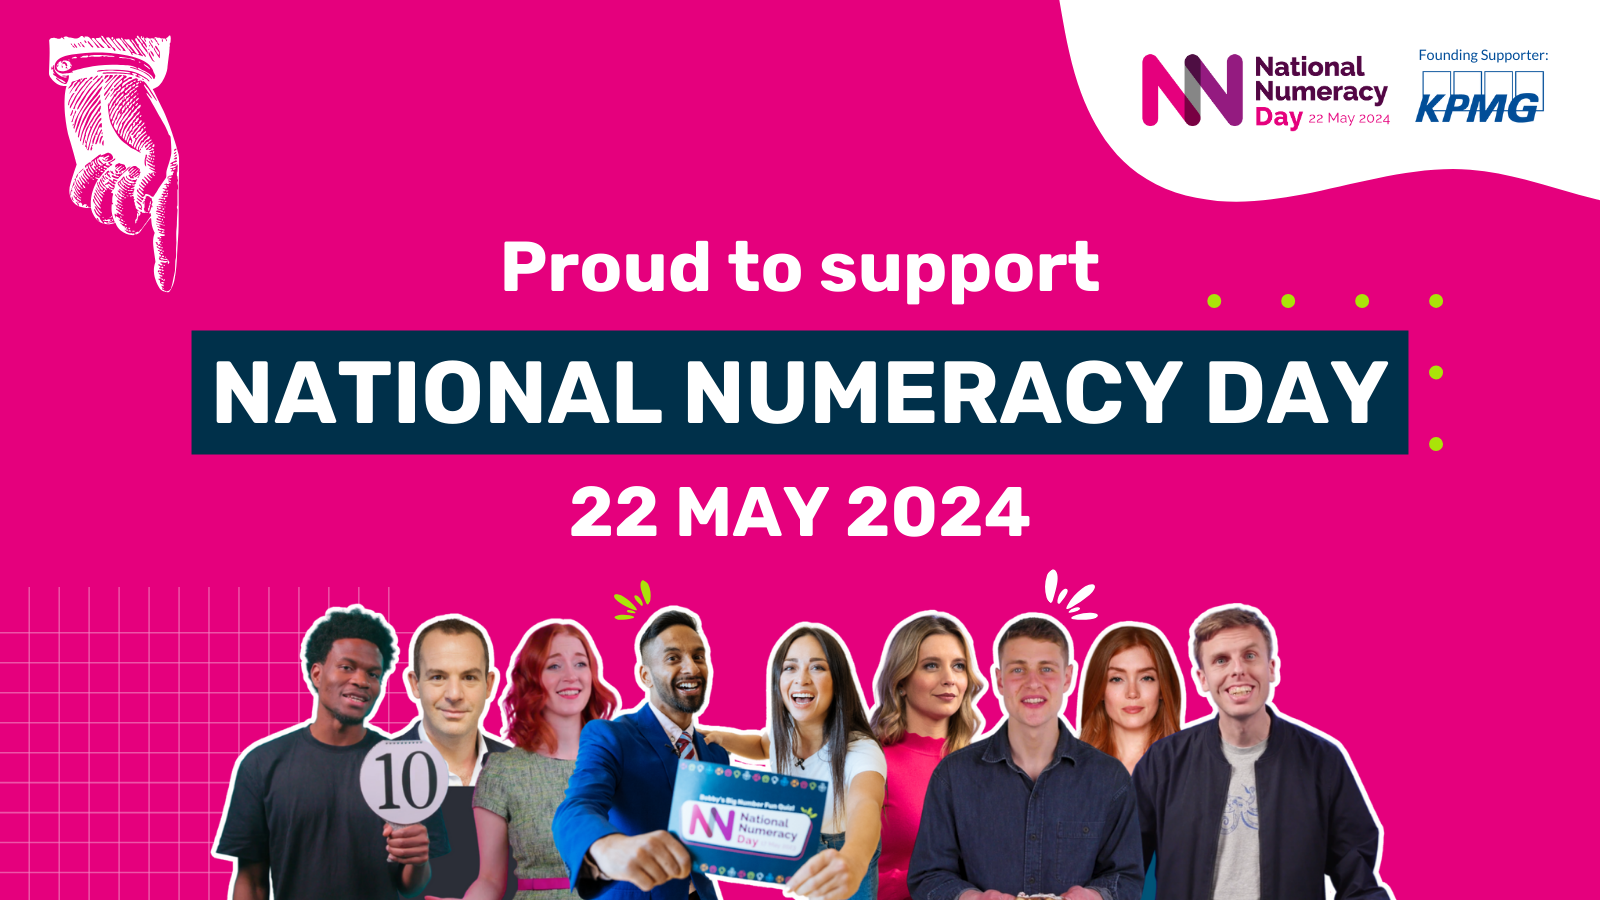 Instagram graphic saying "Proud to support National Numeracy Day 22 May 2024"